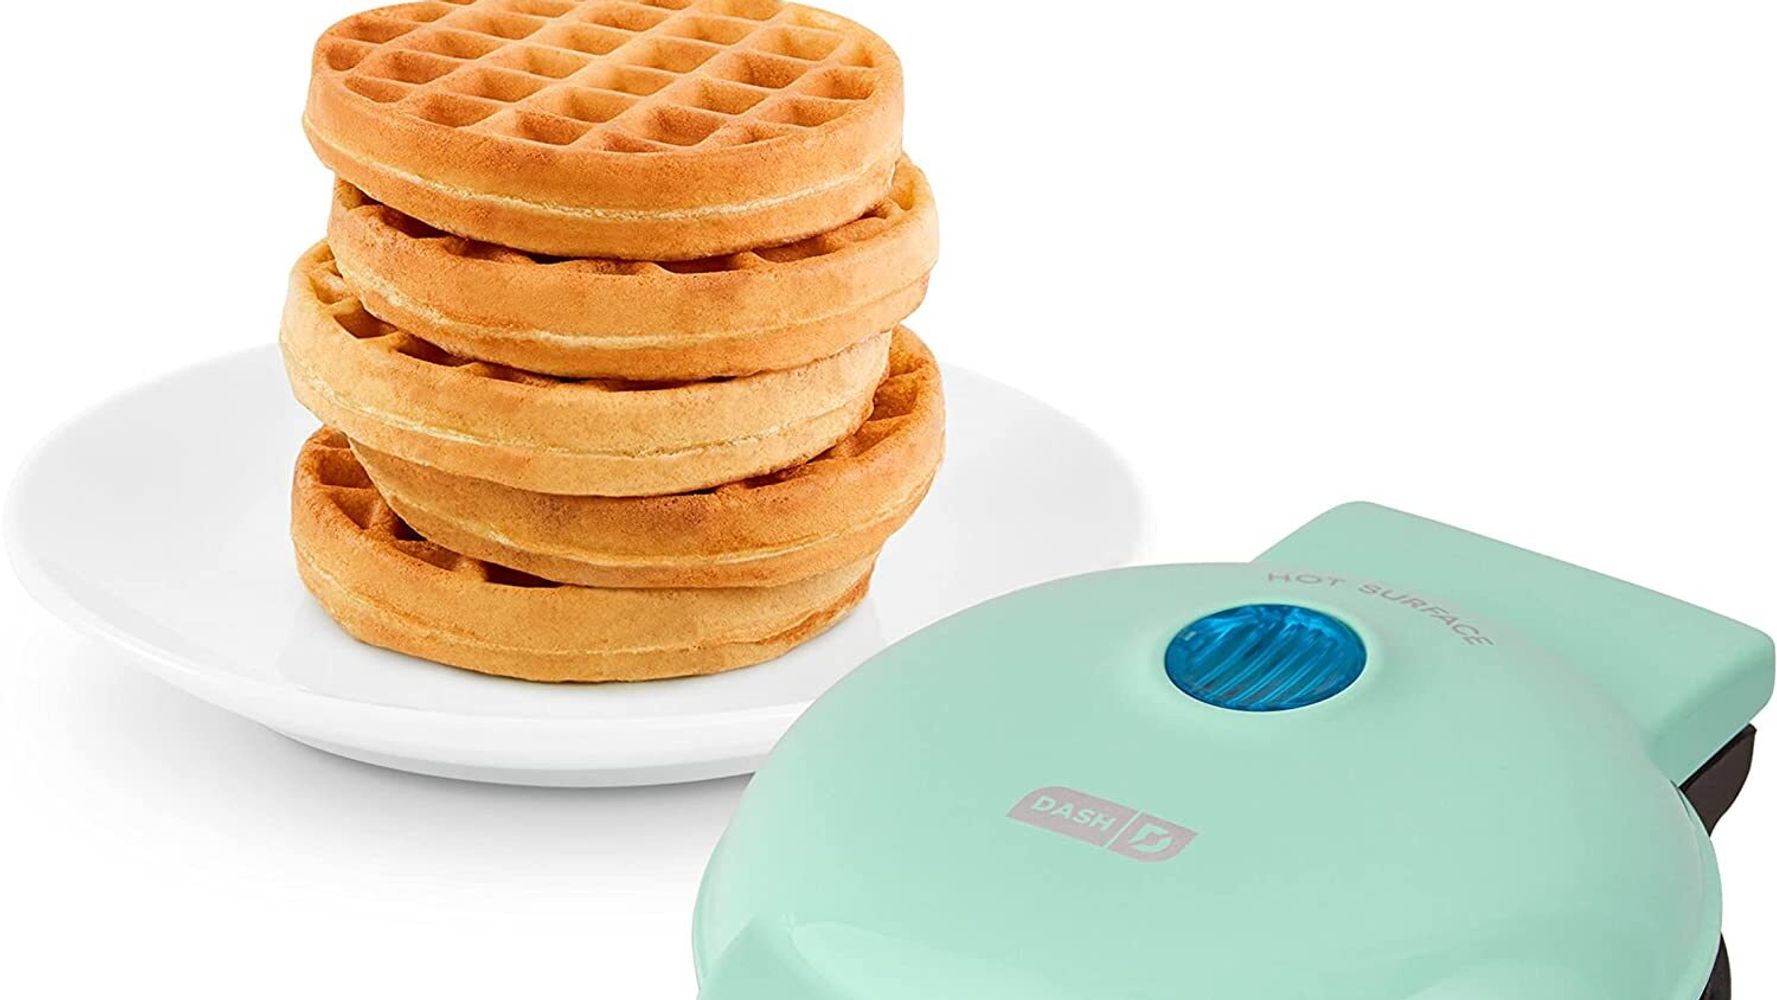 The Dash Mini Waffle Maker is Adorable — But Does It Work